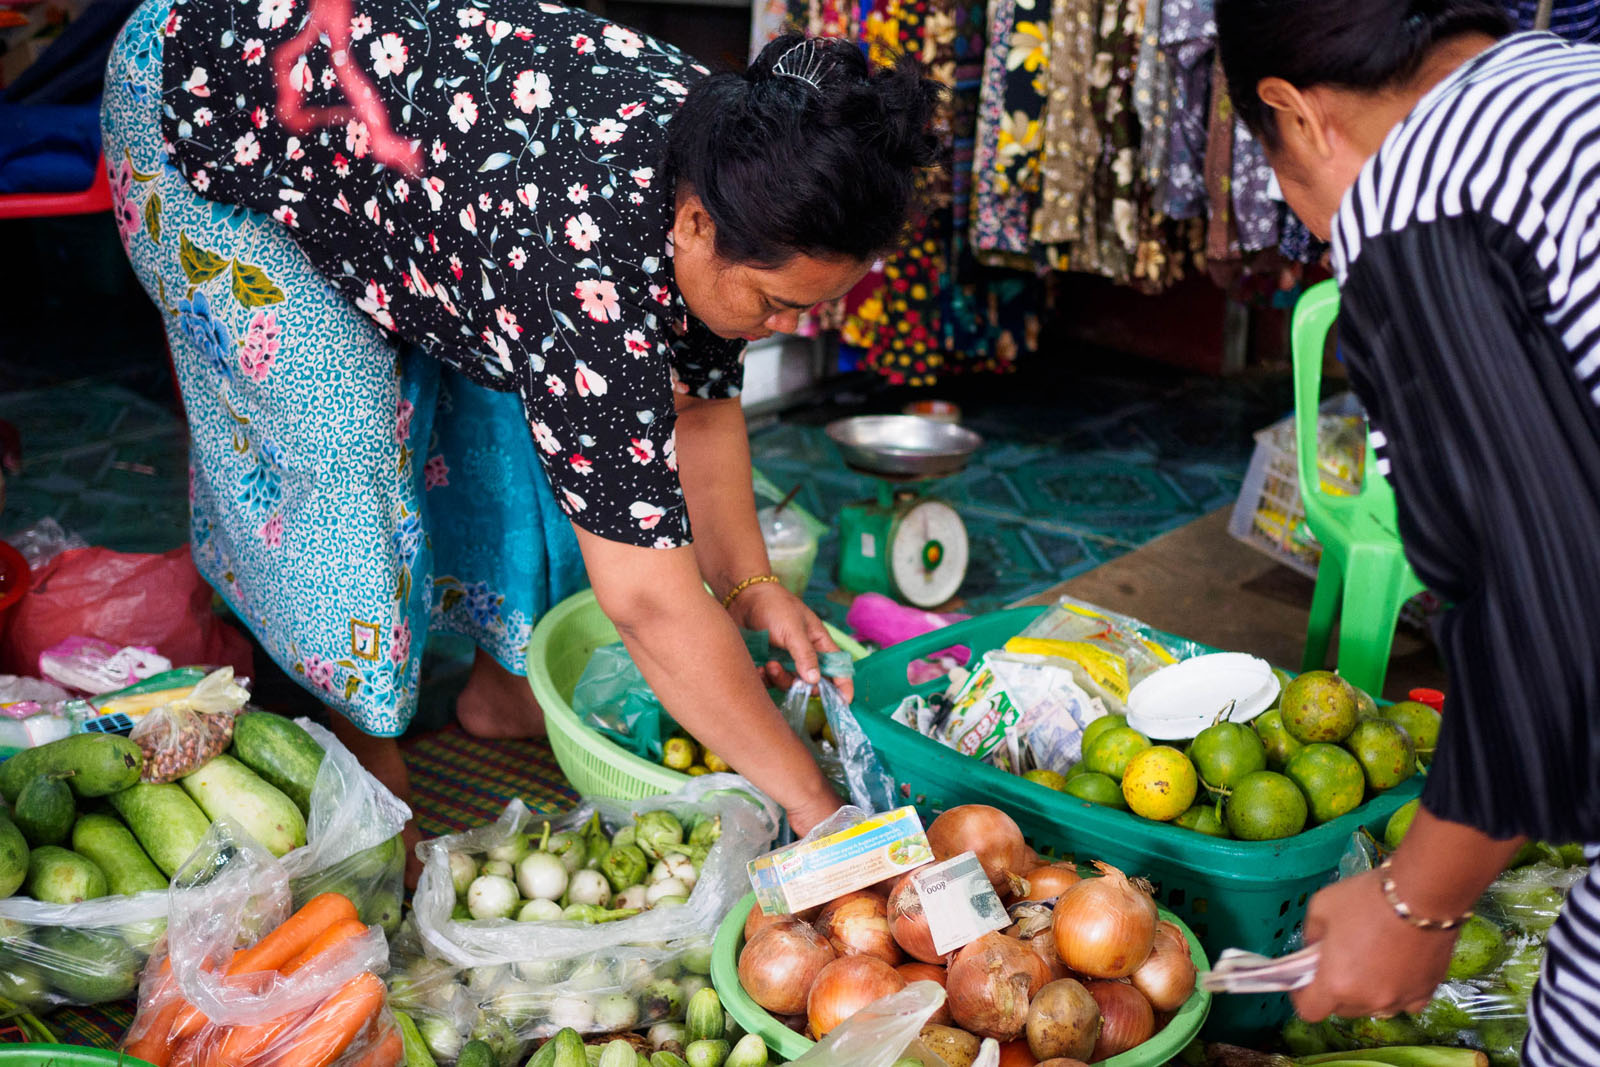 Women sell fruit and vegetables at the local market in Banteay Chhmar. Photo by Emily Lush